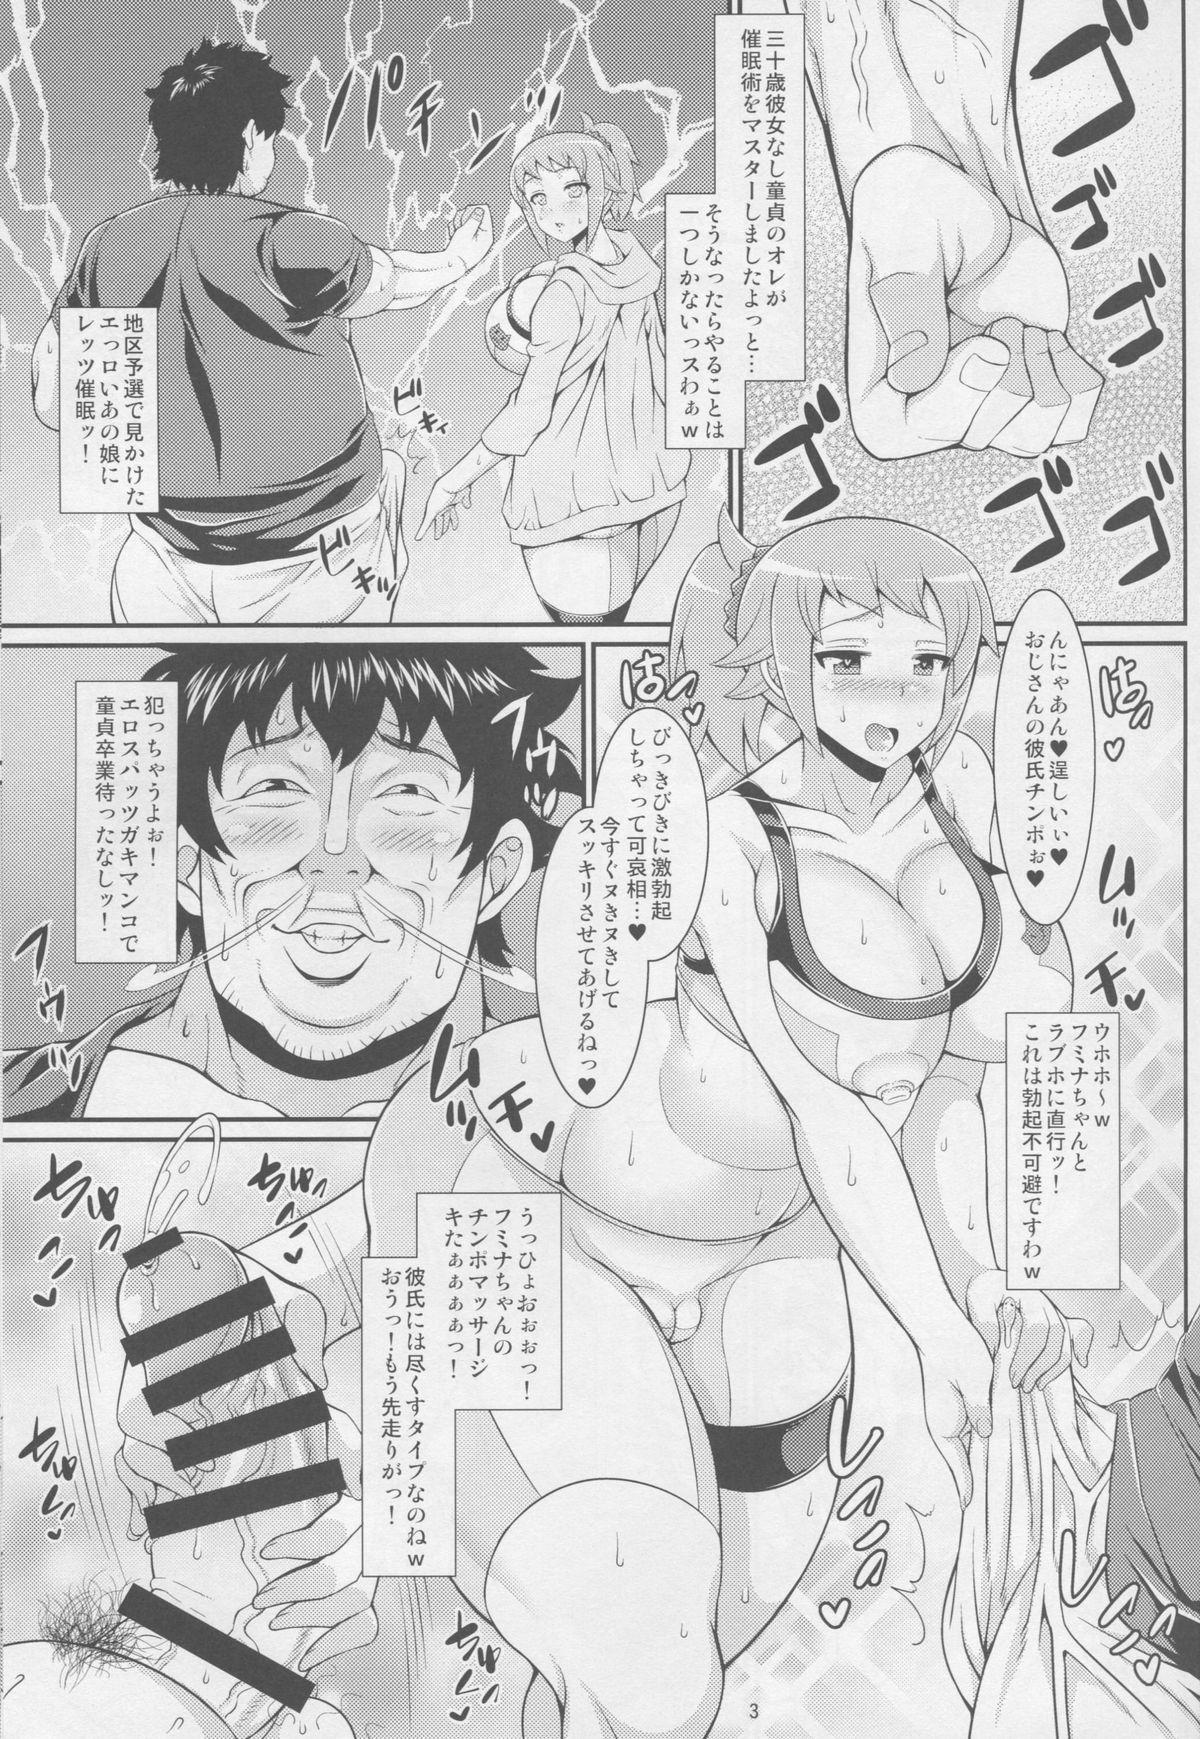 Action Senpai no Ero Ana - Gundam build fighters try Mmf - Page 2